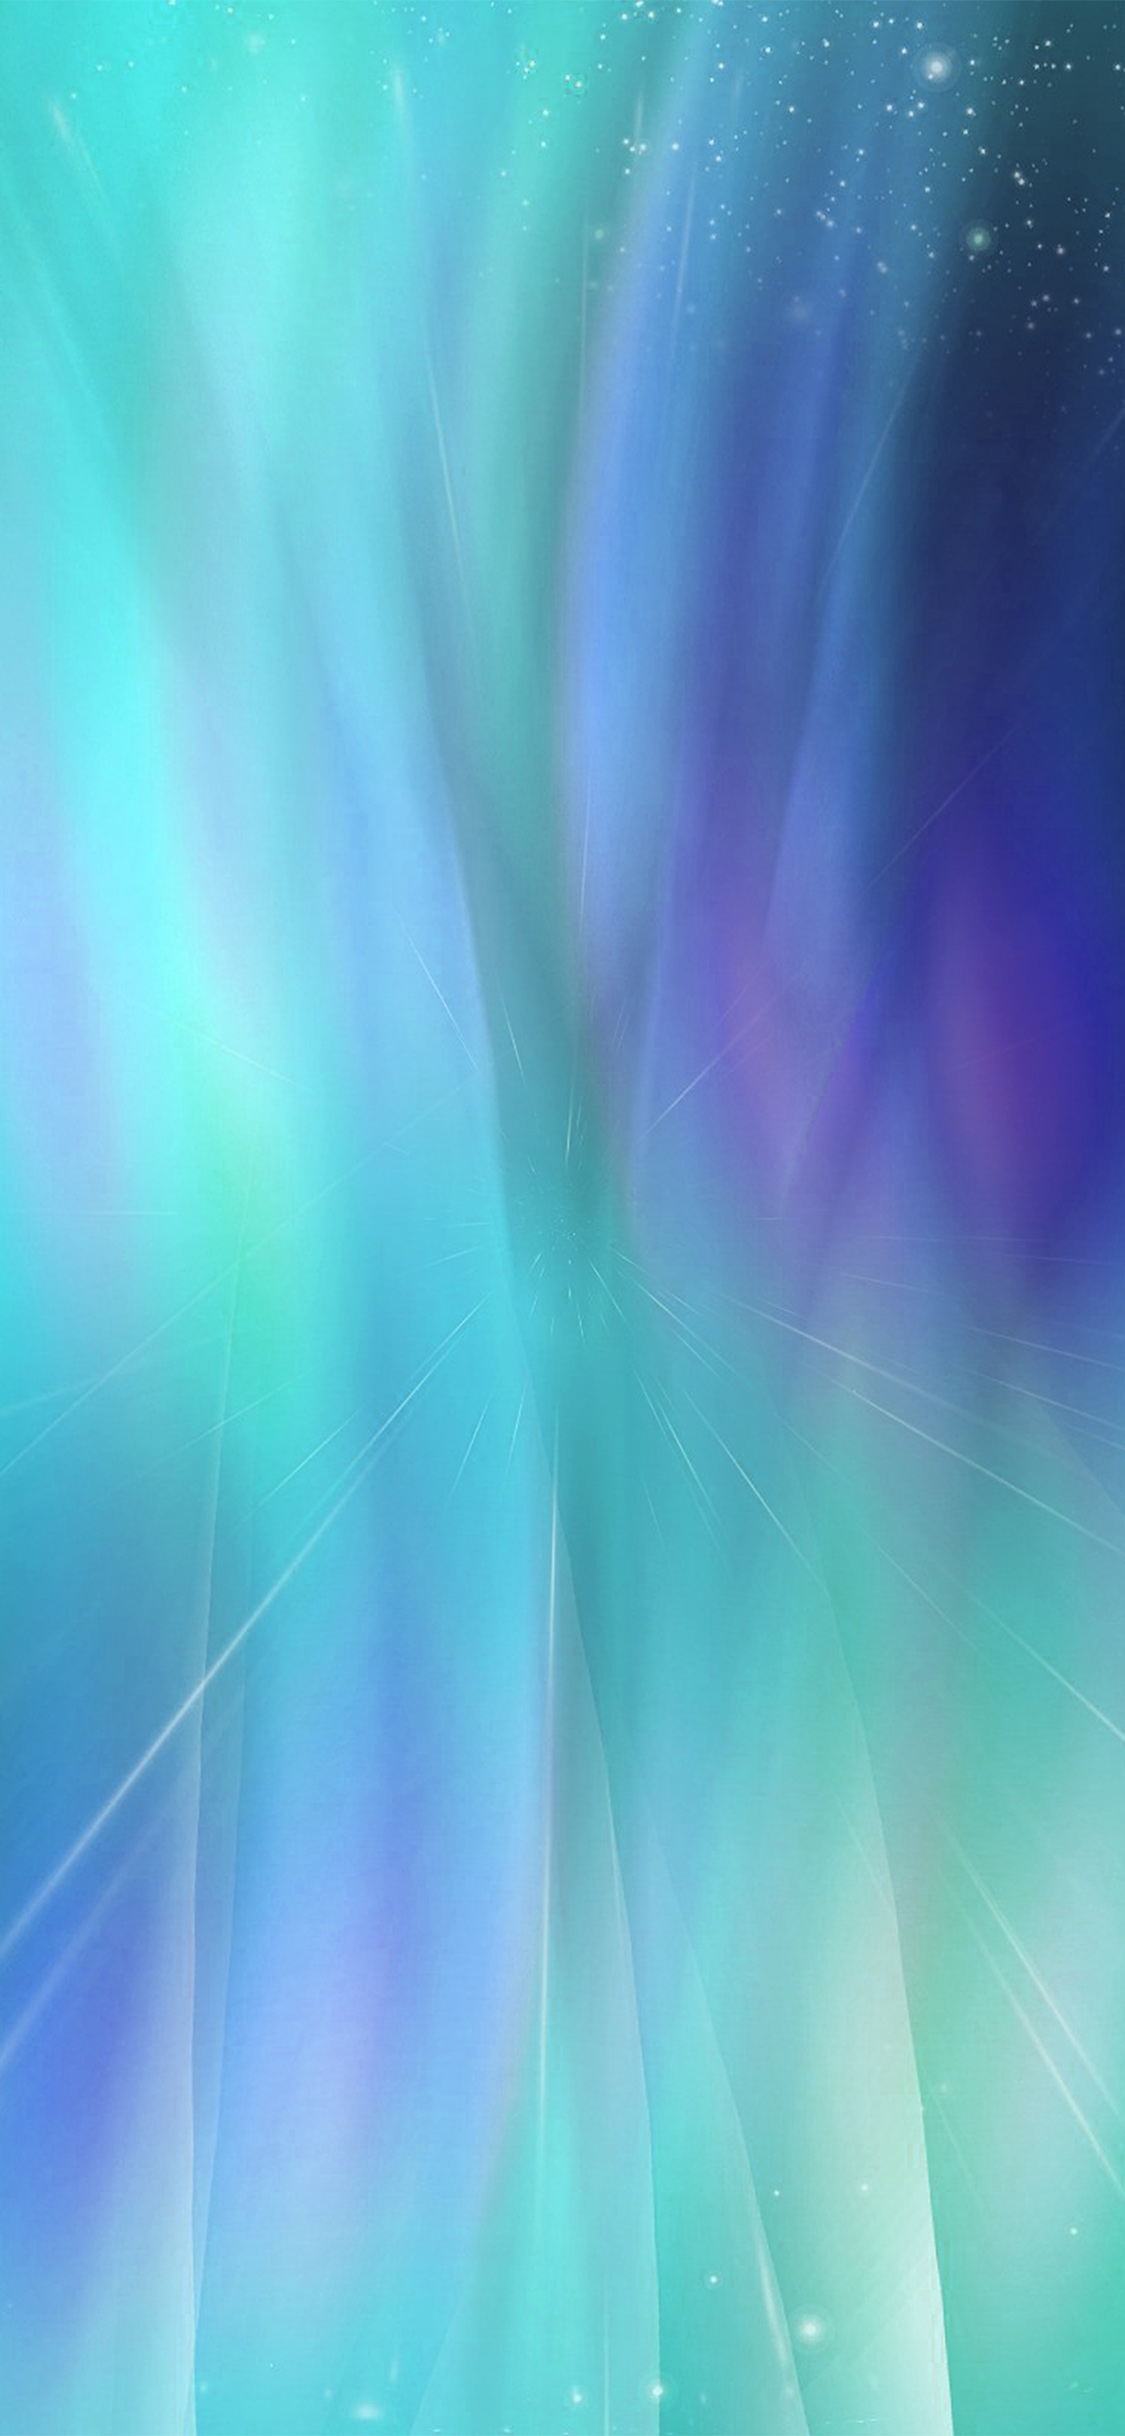 iPhone X wallpaper. fantasy green blue abstract pattern